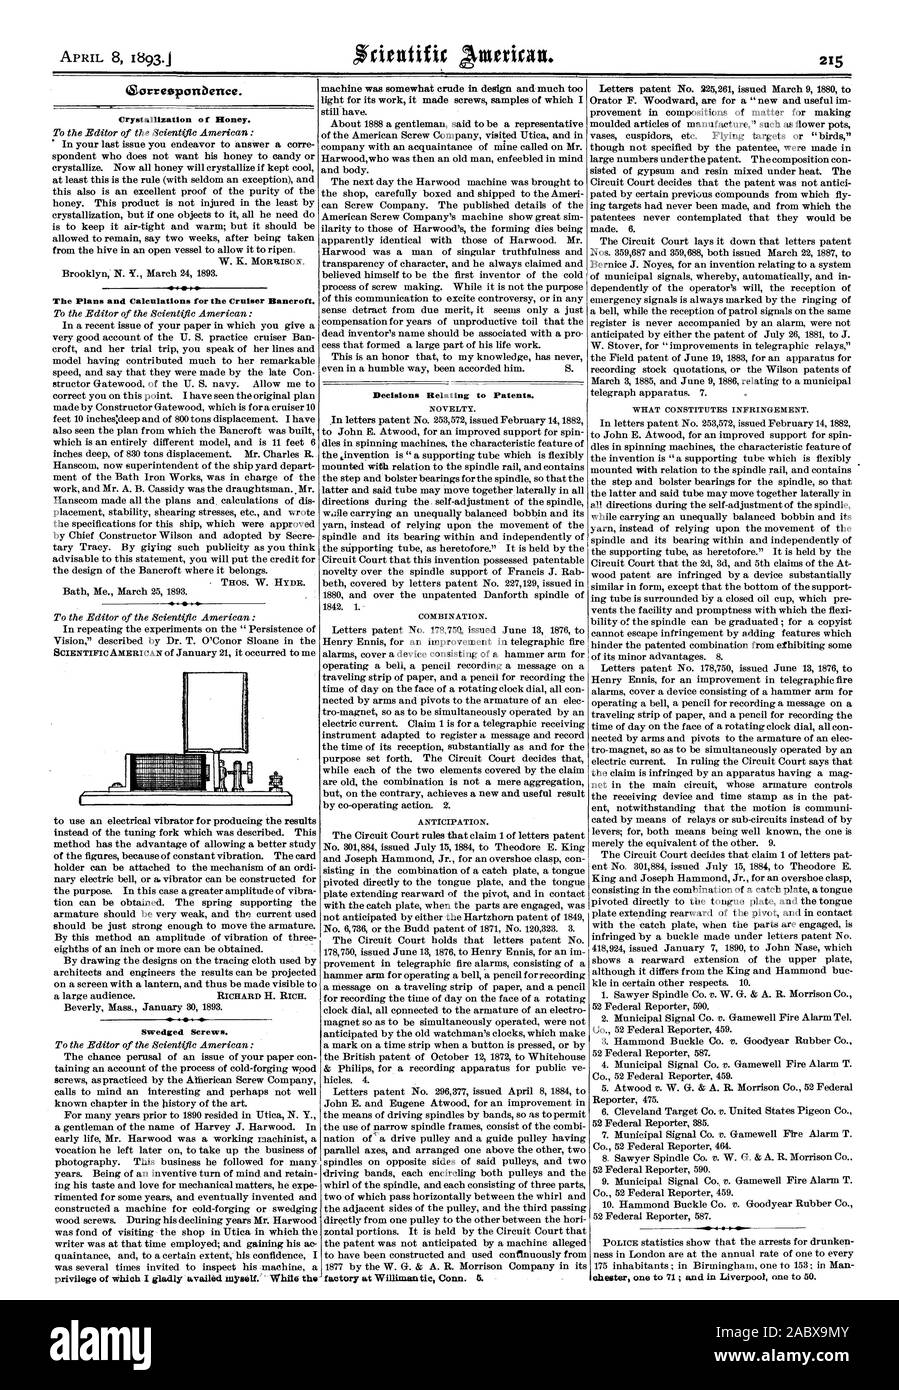 Zorrespartbence. Crystallization of Honey. The Plans and Calculations for the Cruiser Bancroft. Decisions Relating to Patents. NOVELTY. COMBINATION. ANTICIPATION. WHAT CONSTITUTES INFRINGEMENT. Swedged Screws., scientific american, 1893-04-08 Stock Photo